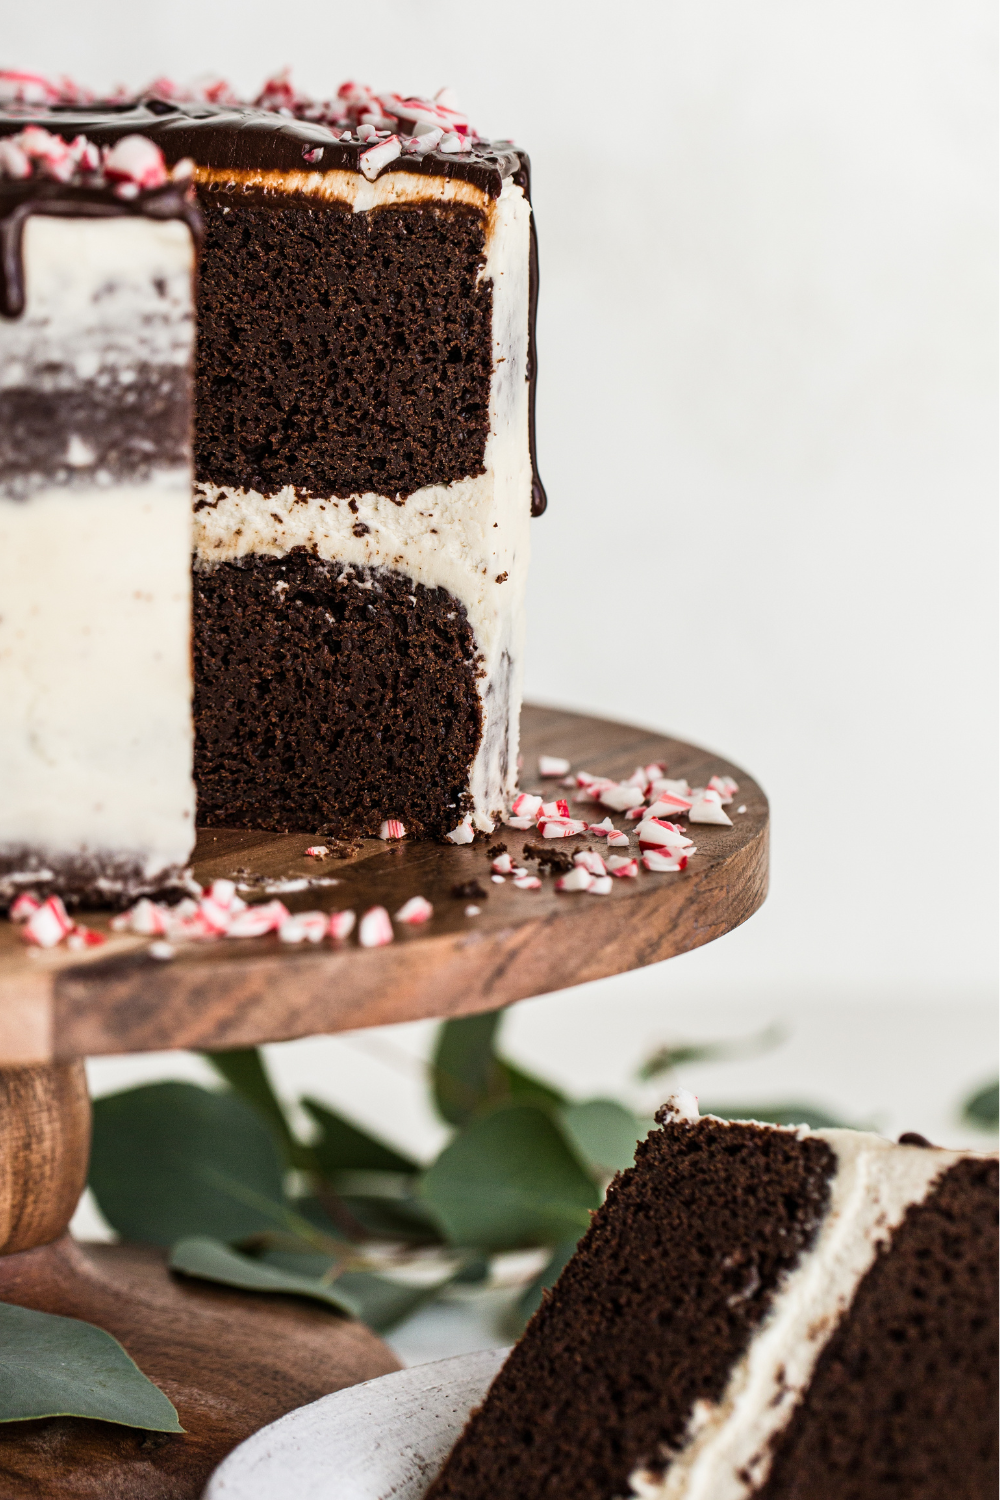 the full decorated Peppermint Chocolate Cake on a cake stand, with a slice taken out.